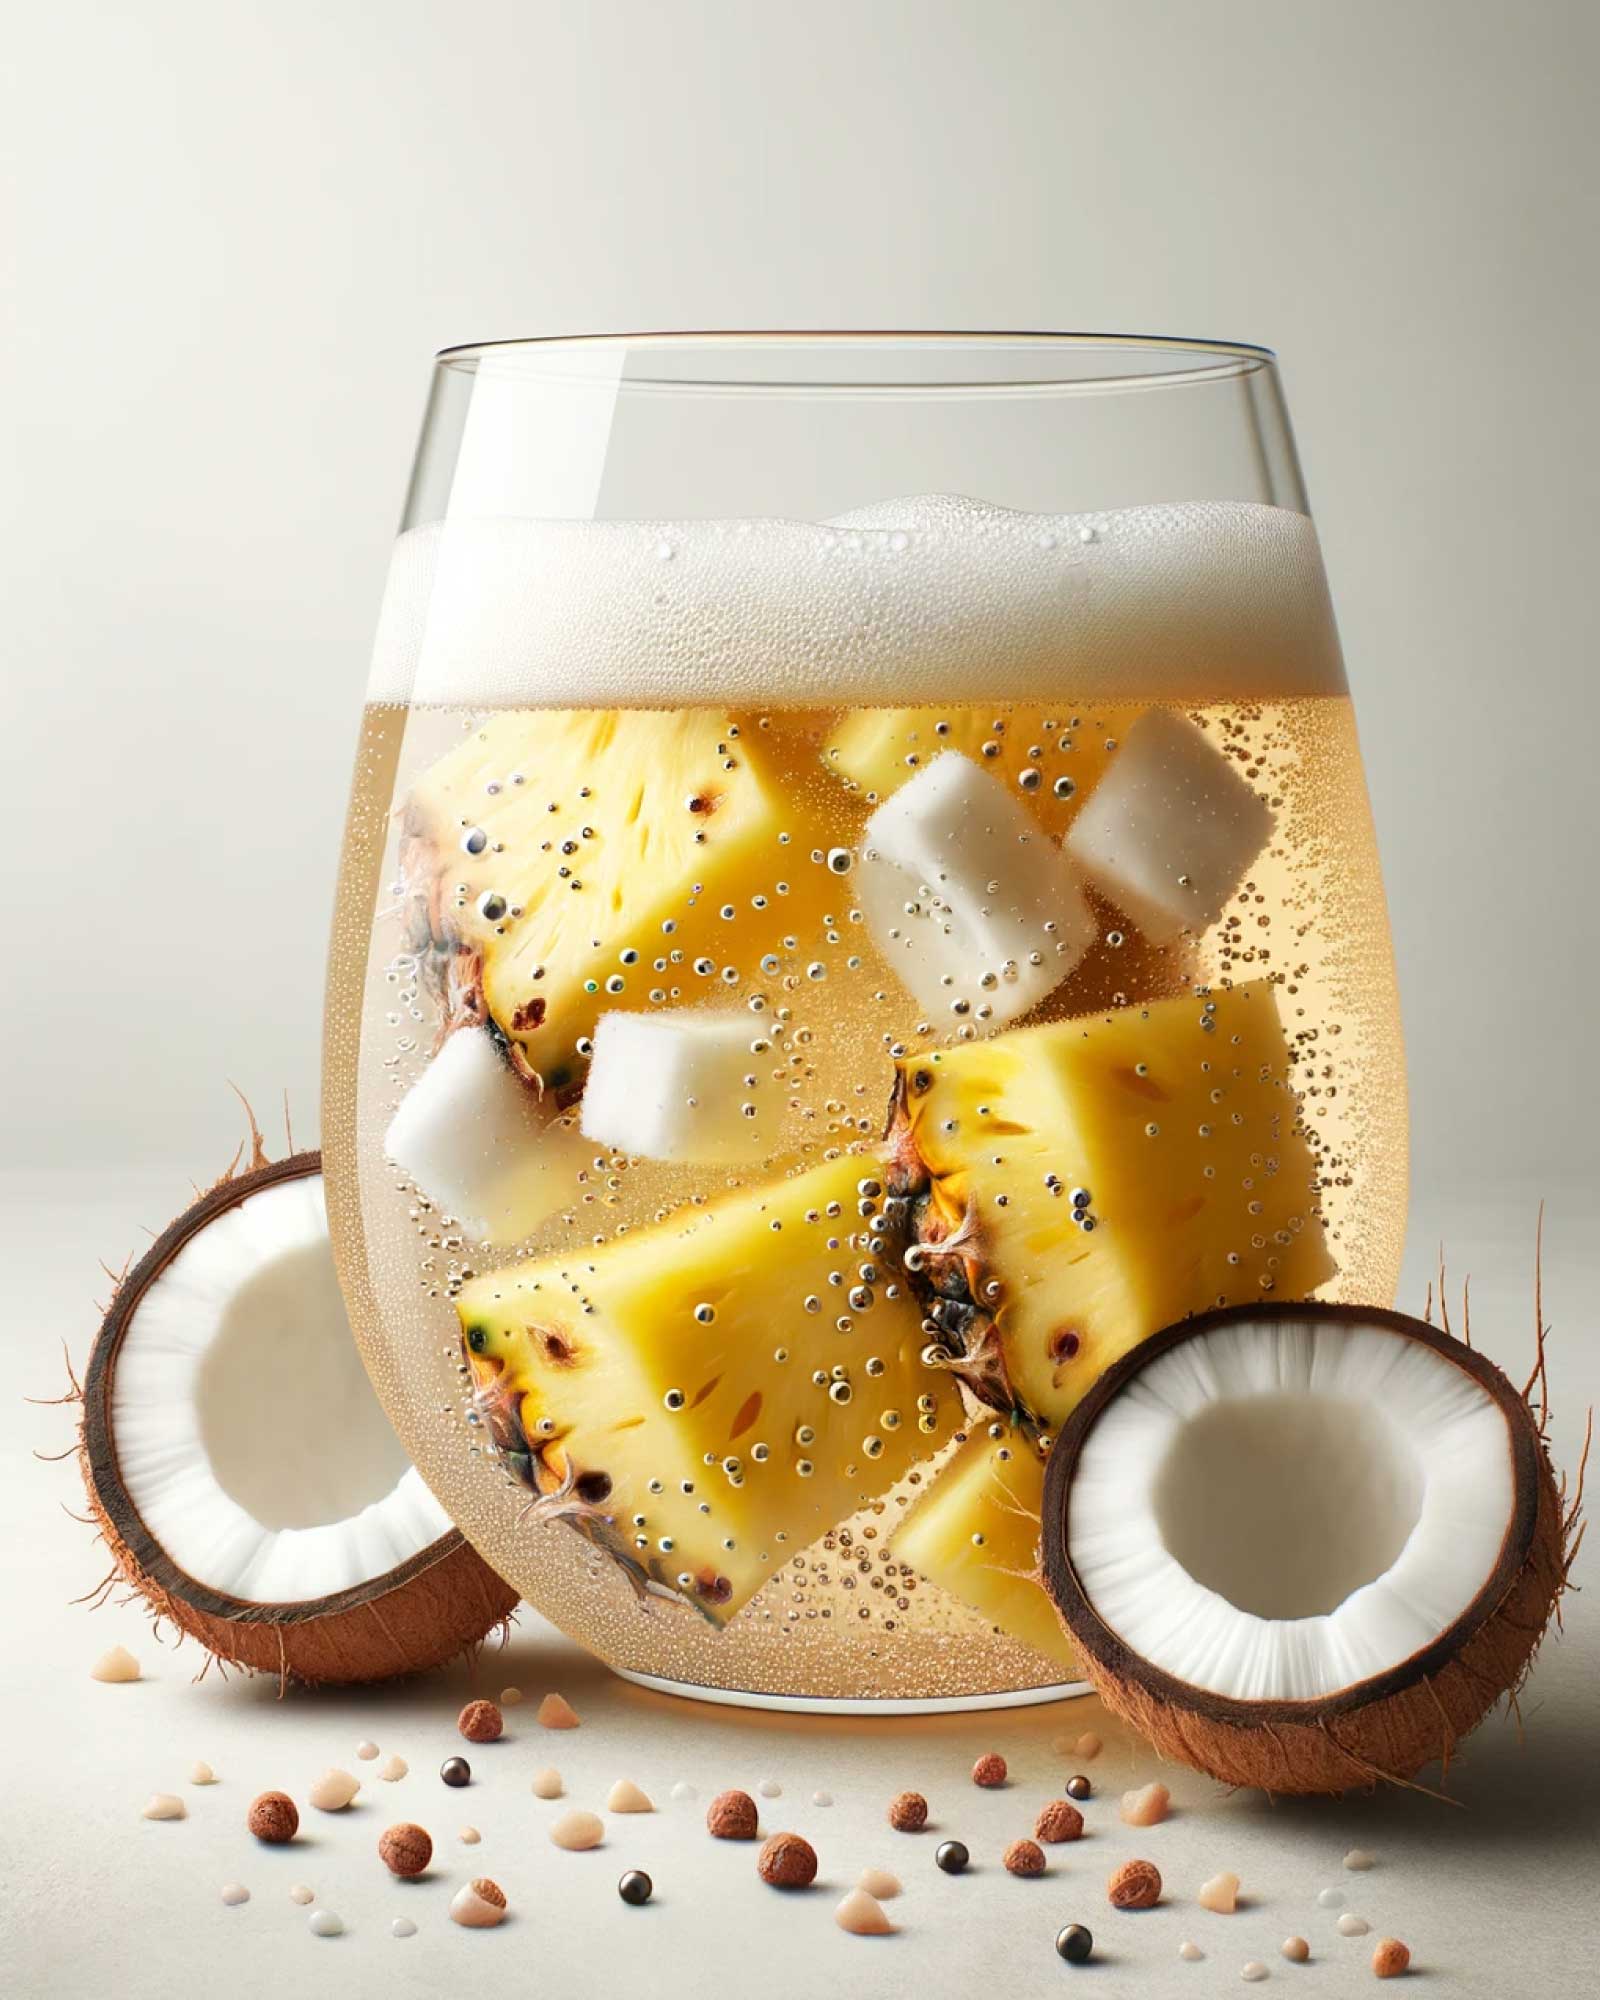 AI created image of a glass with fizzy drink and fruit pieces, Graudupes Coconut & Pineapple Kombucha (Piña Colada) - Natural Fermented Tea Drink With Fruit Juice and Probiotics.